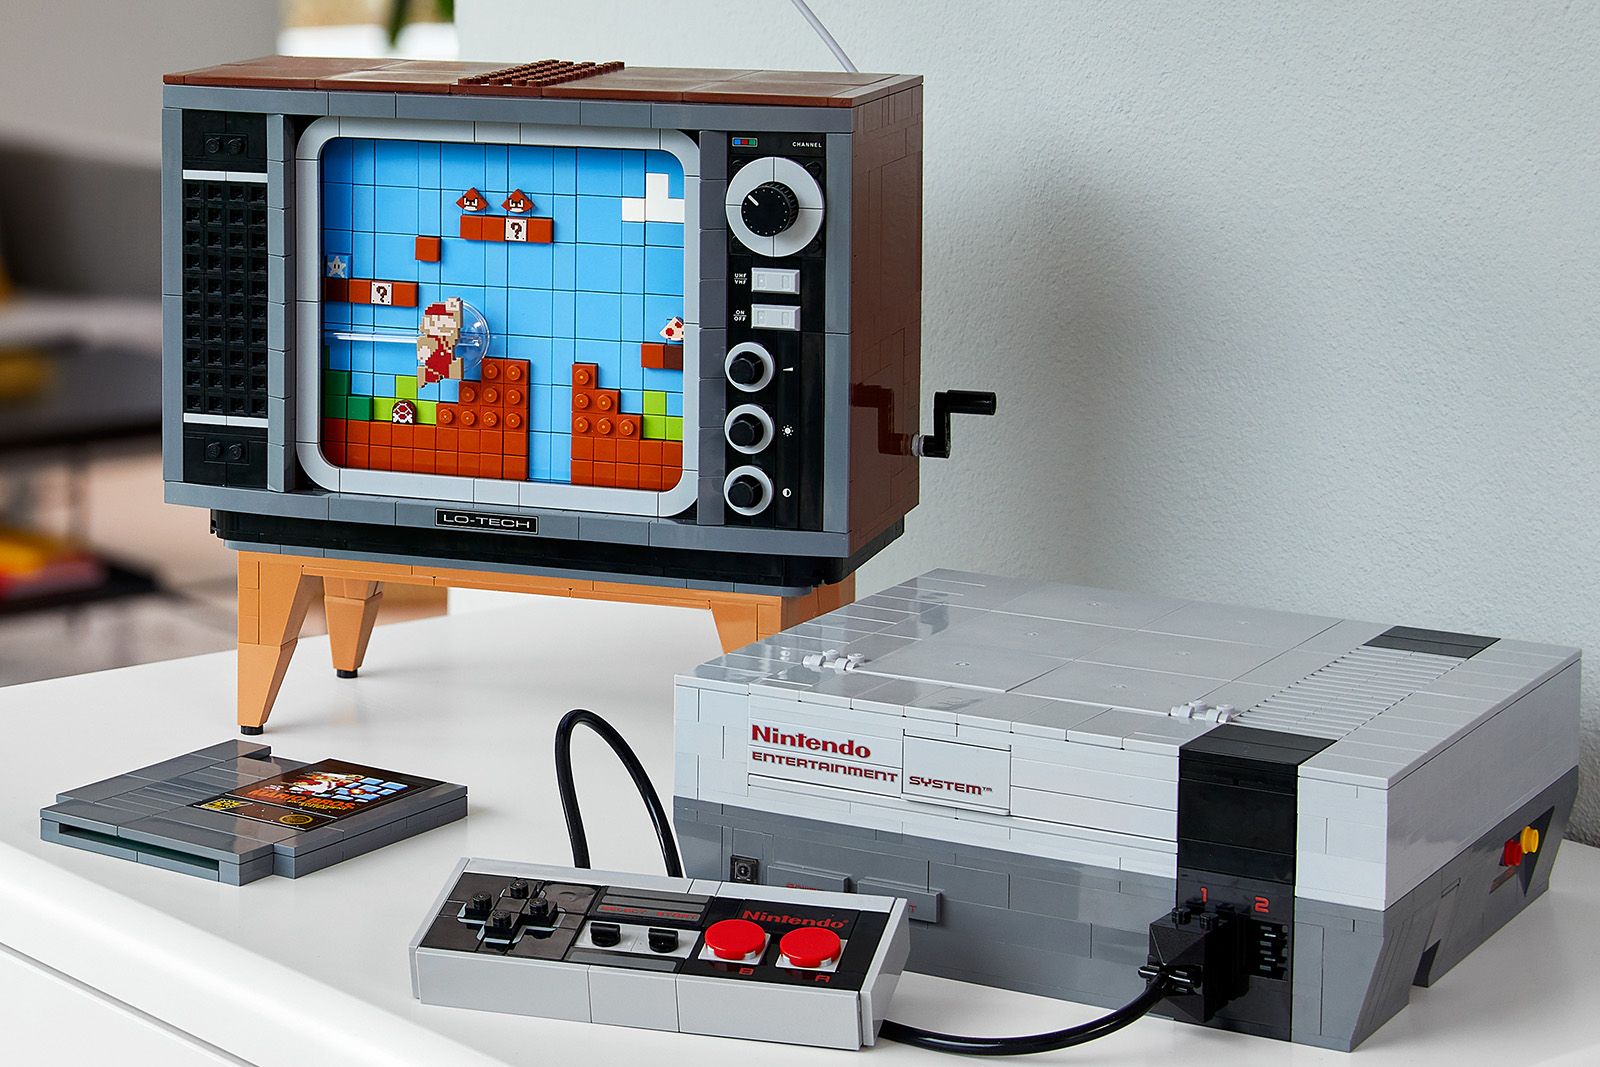 Lego Nintendo Entertainment System official, build your own NES with CRT TV photo 1